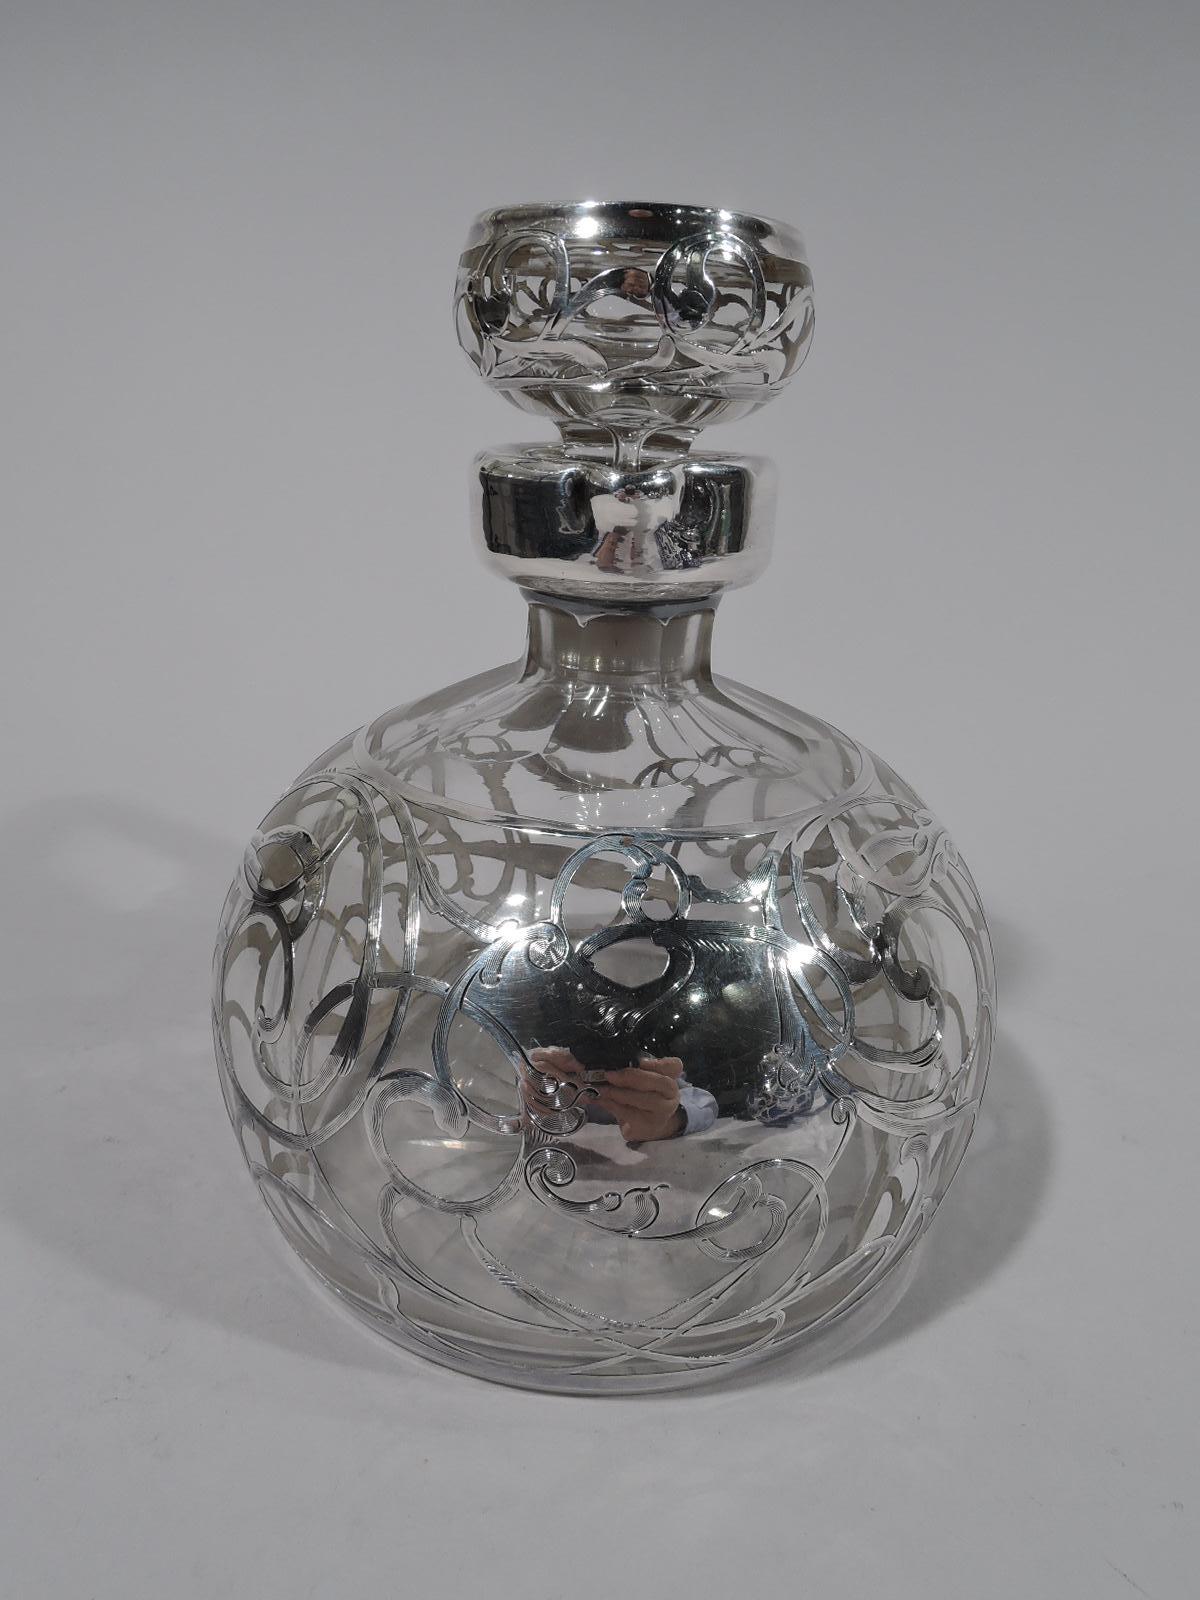 American Art Nouveau clear glass jug decanter with silver overlay, circa 1910. Globular with short faceted neck and bracket handle. Stopper flat topped with short plug. Rolling and entwined engraved silver scrollwork with leaves. Asymmetrical